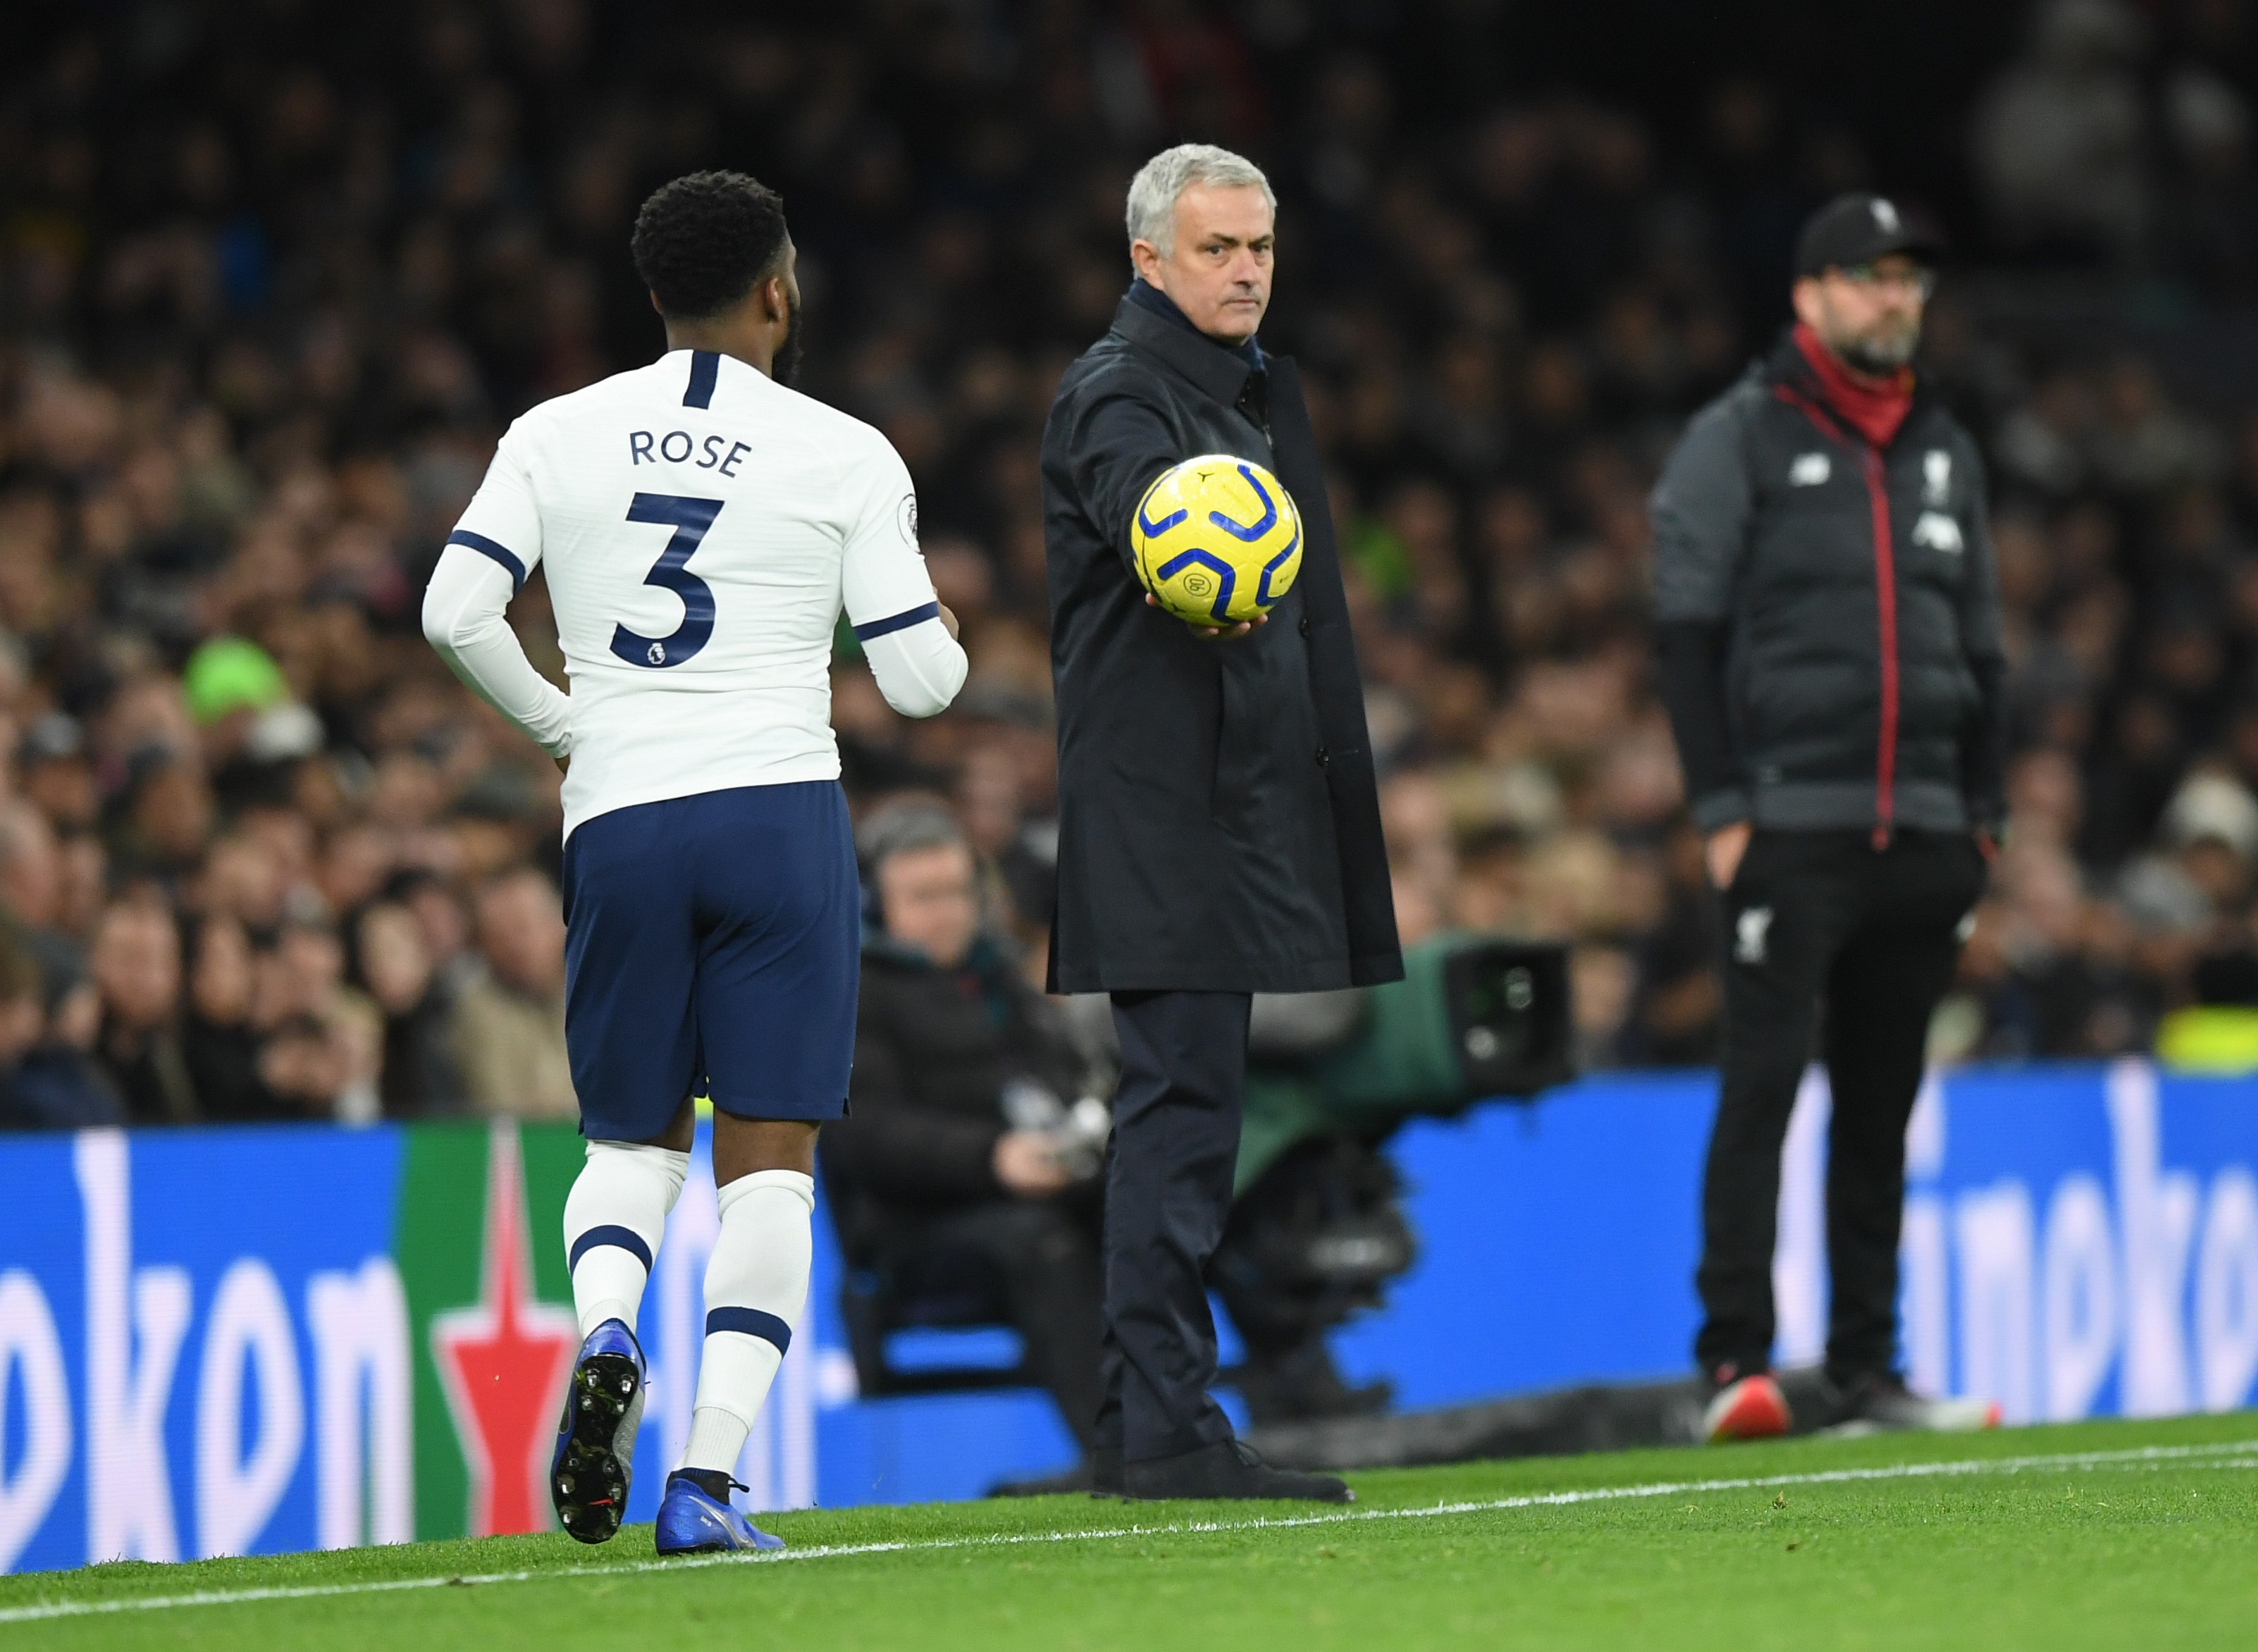 All is not well between Mourinho and Danny Rose (Photo by Shaun Botterill/Getty Images)